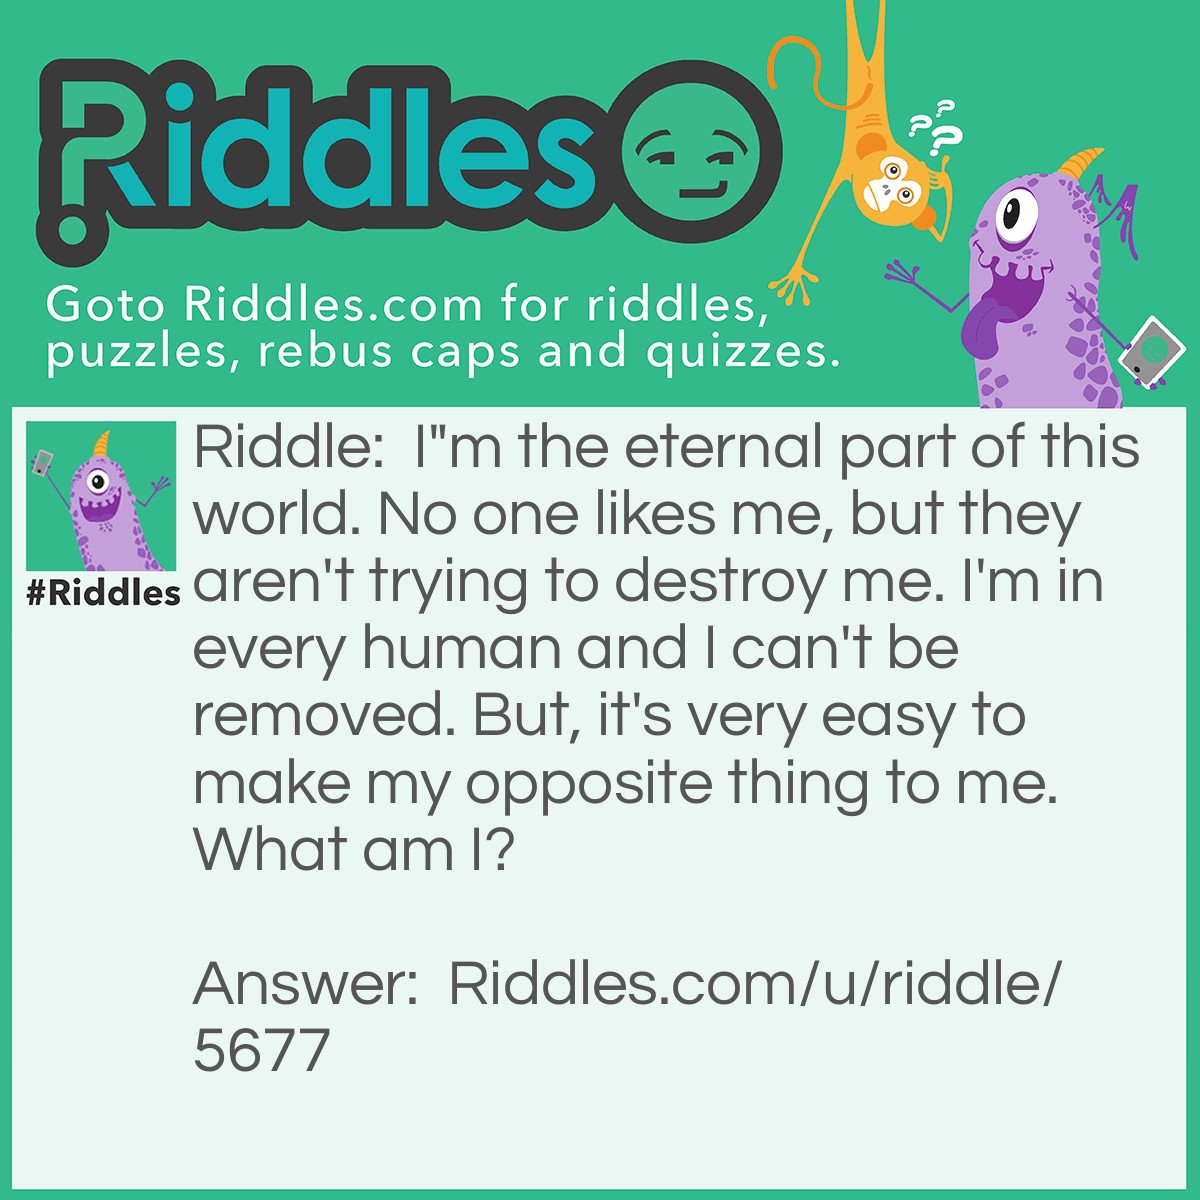 Riddle: I"m the eternal part of this world. No one likes me, but they aren't trying to destroy me. I'm in every human and I can't be removed. But, it's very easy to make my opposite thing to me. What am I? Answer: The Hatred.